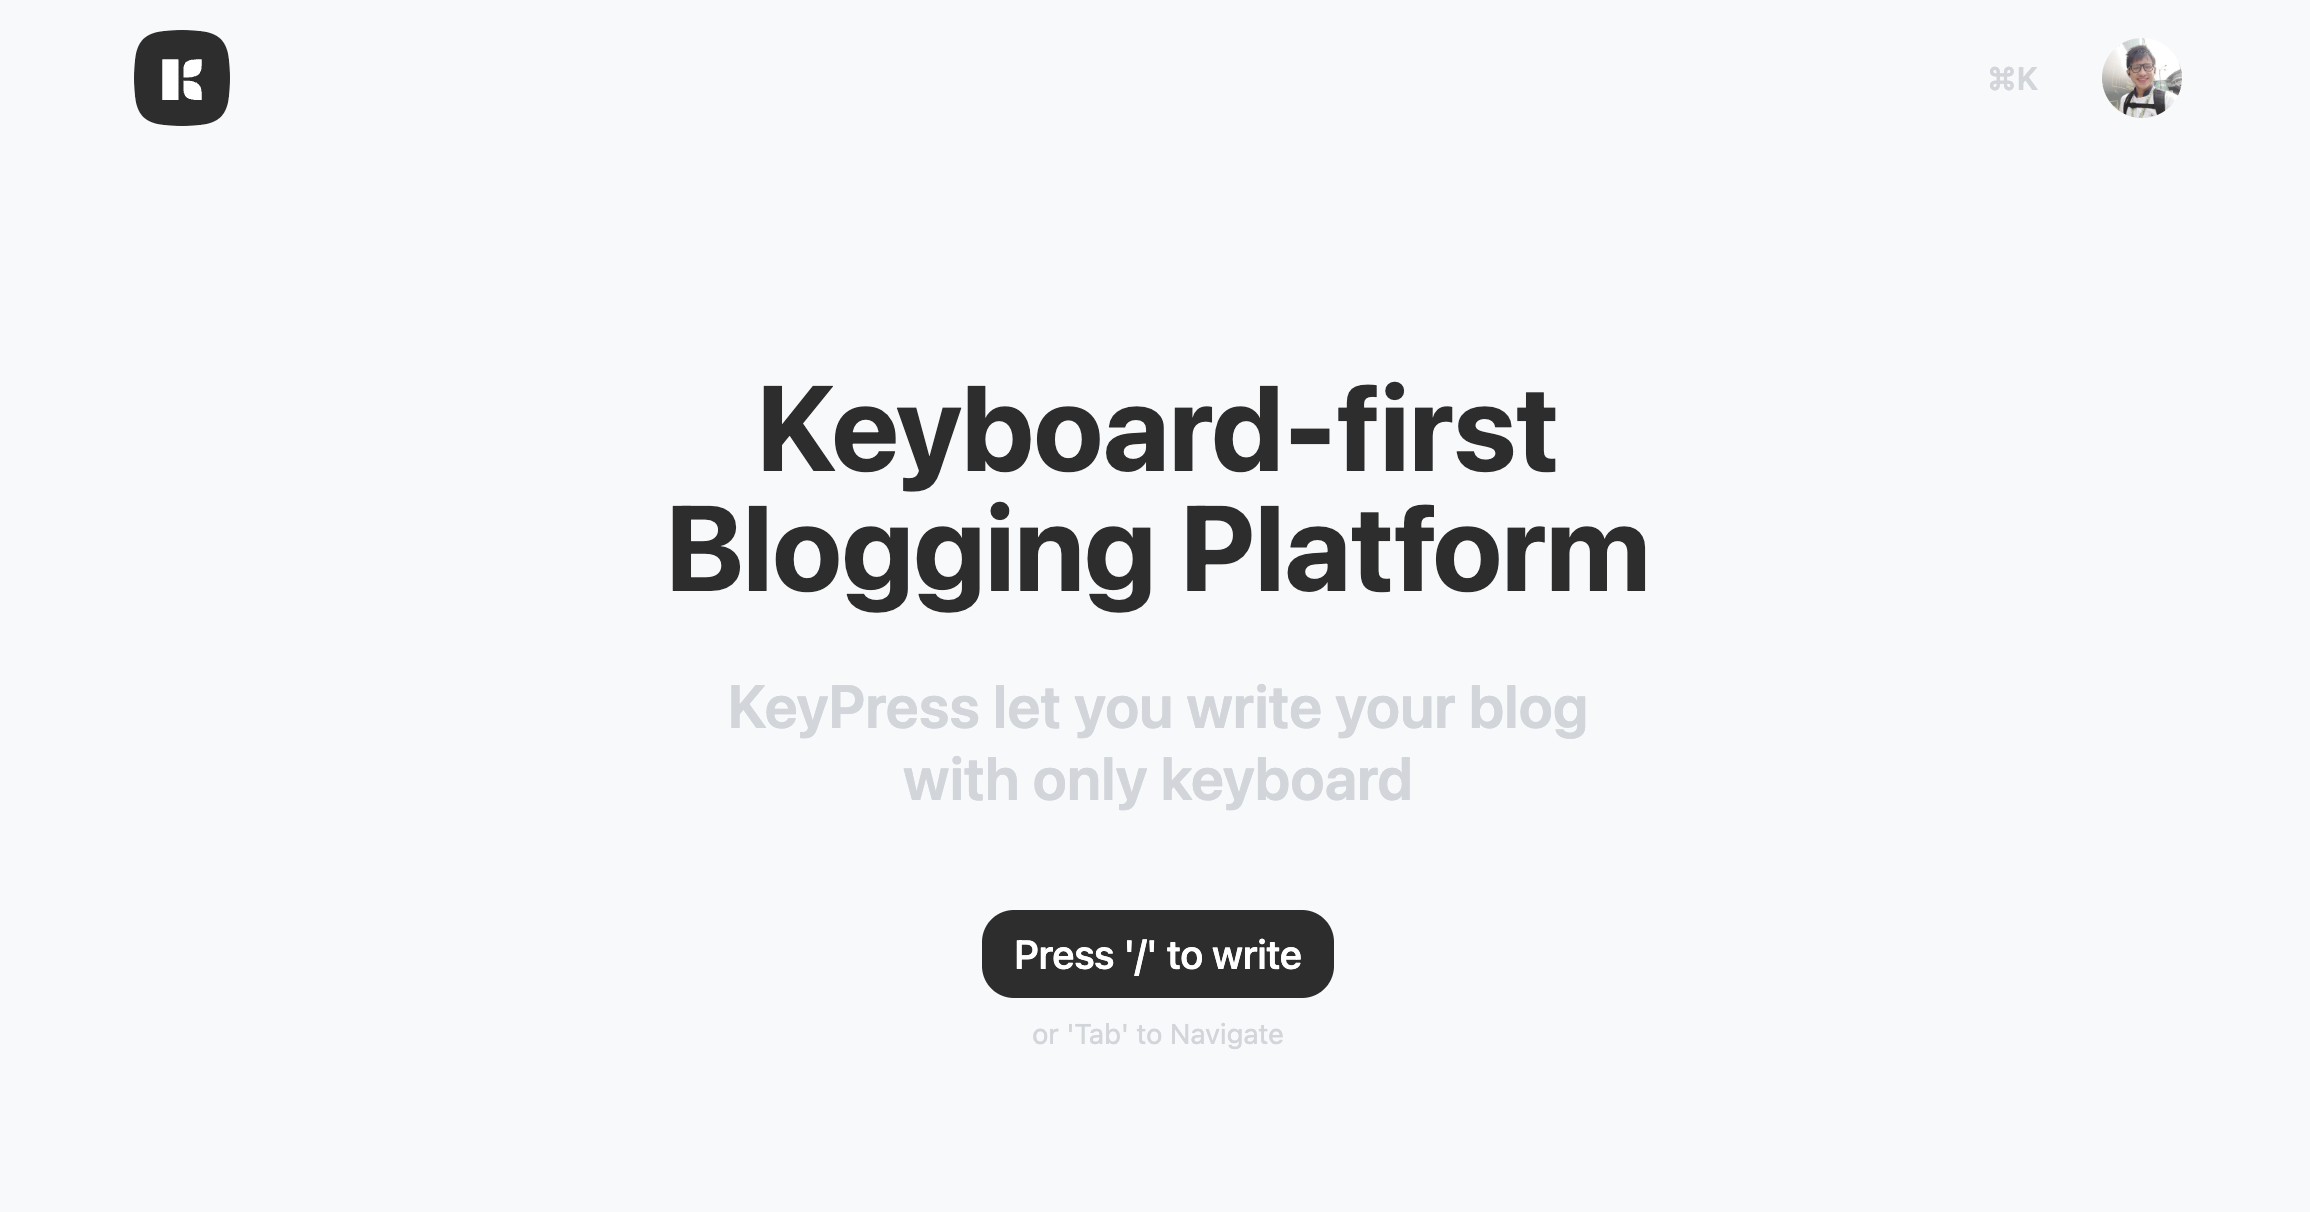 KeyPress - open-source blogging platform that focused on keyboard-first experience